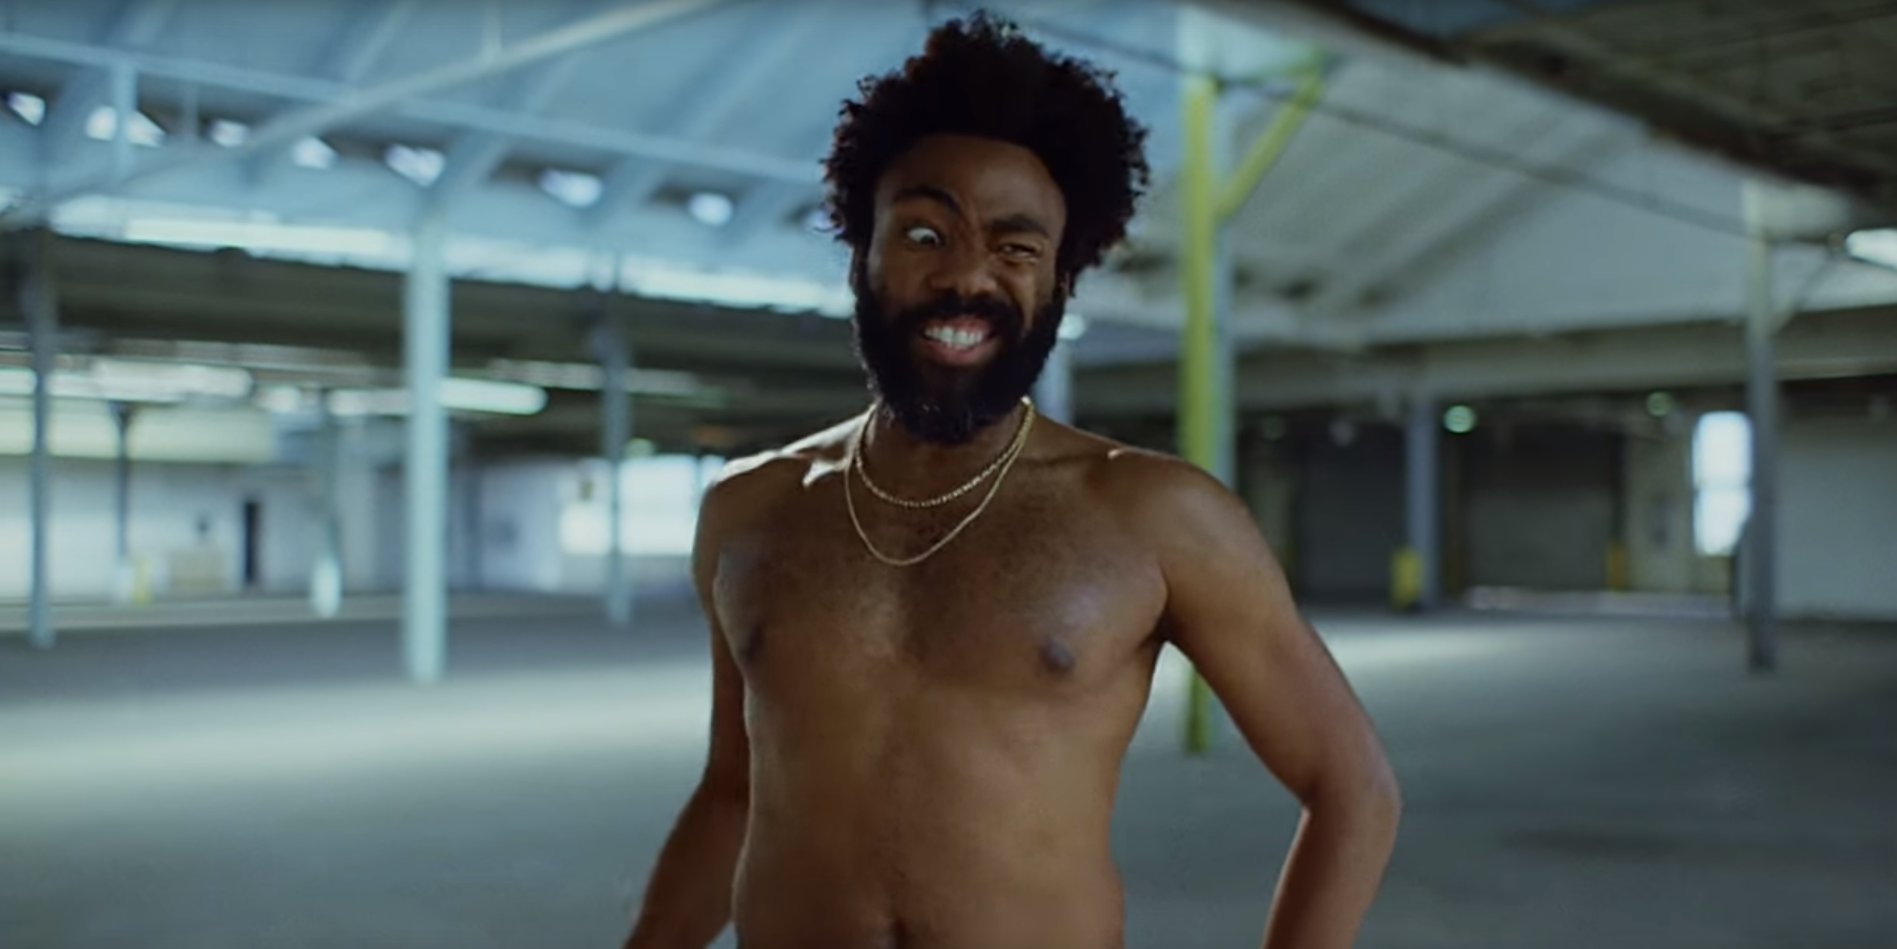 childish-gambino-this-is-america-exaggerated-facial-expression